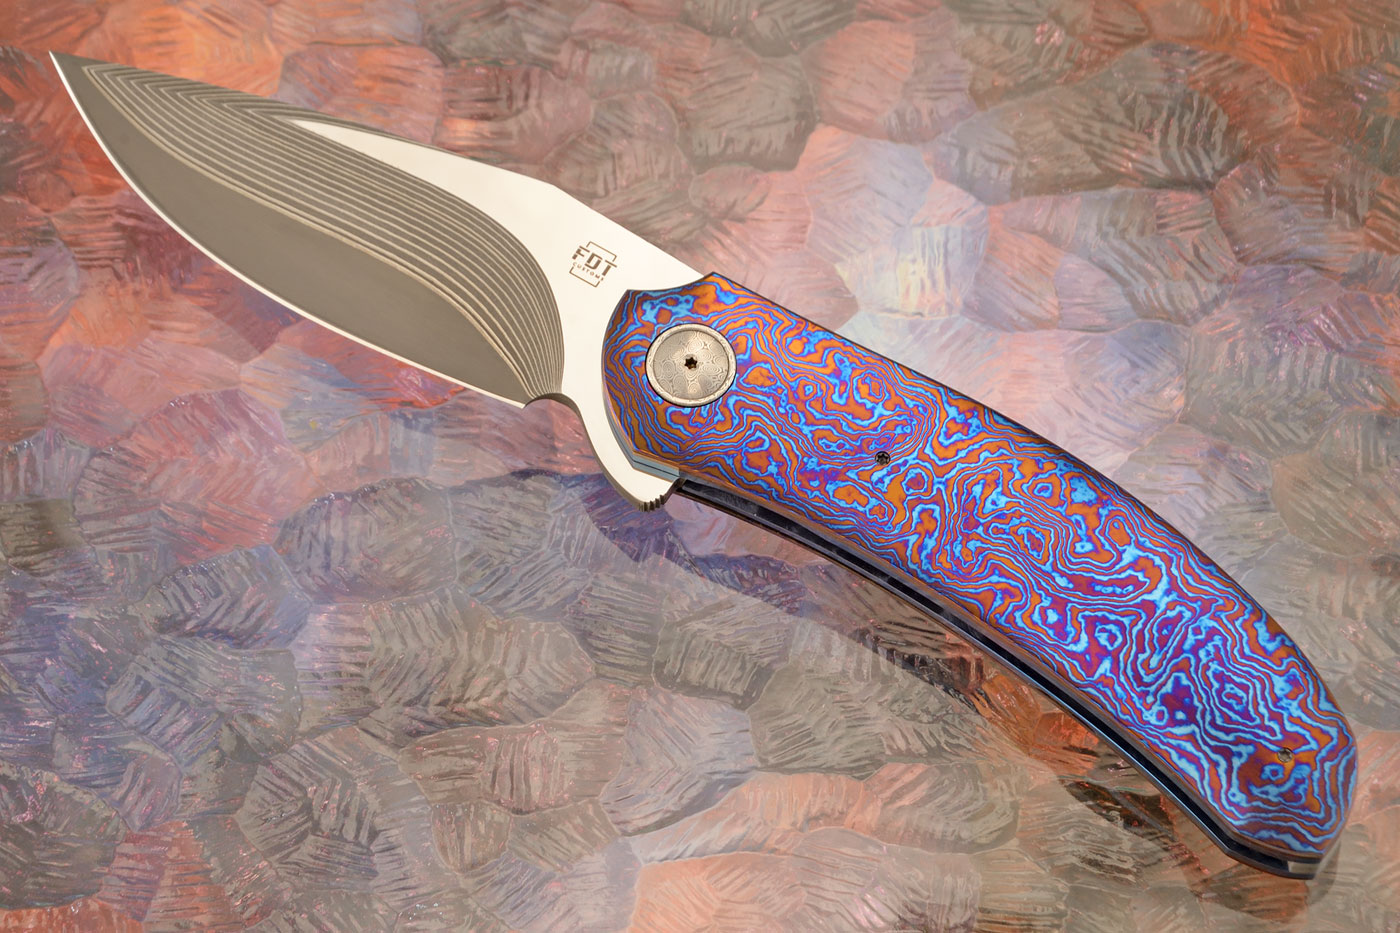 TF-4 Flipper with SG2 San Mai Damascus and White Timascus (Ceramic IKBS)